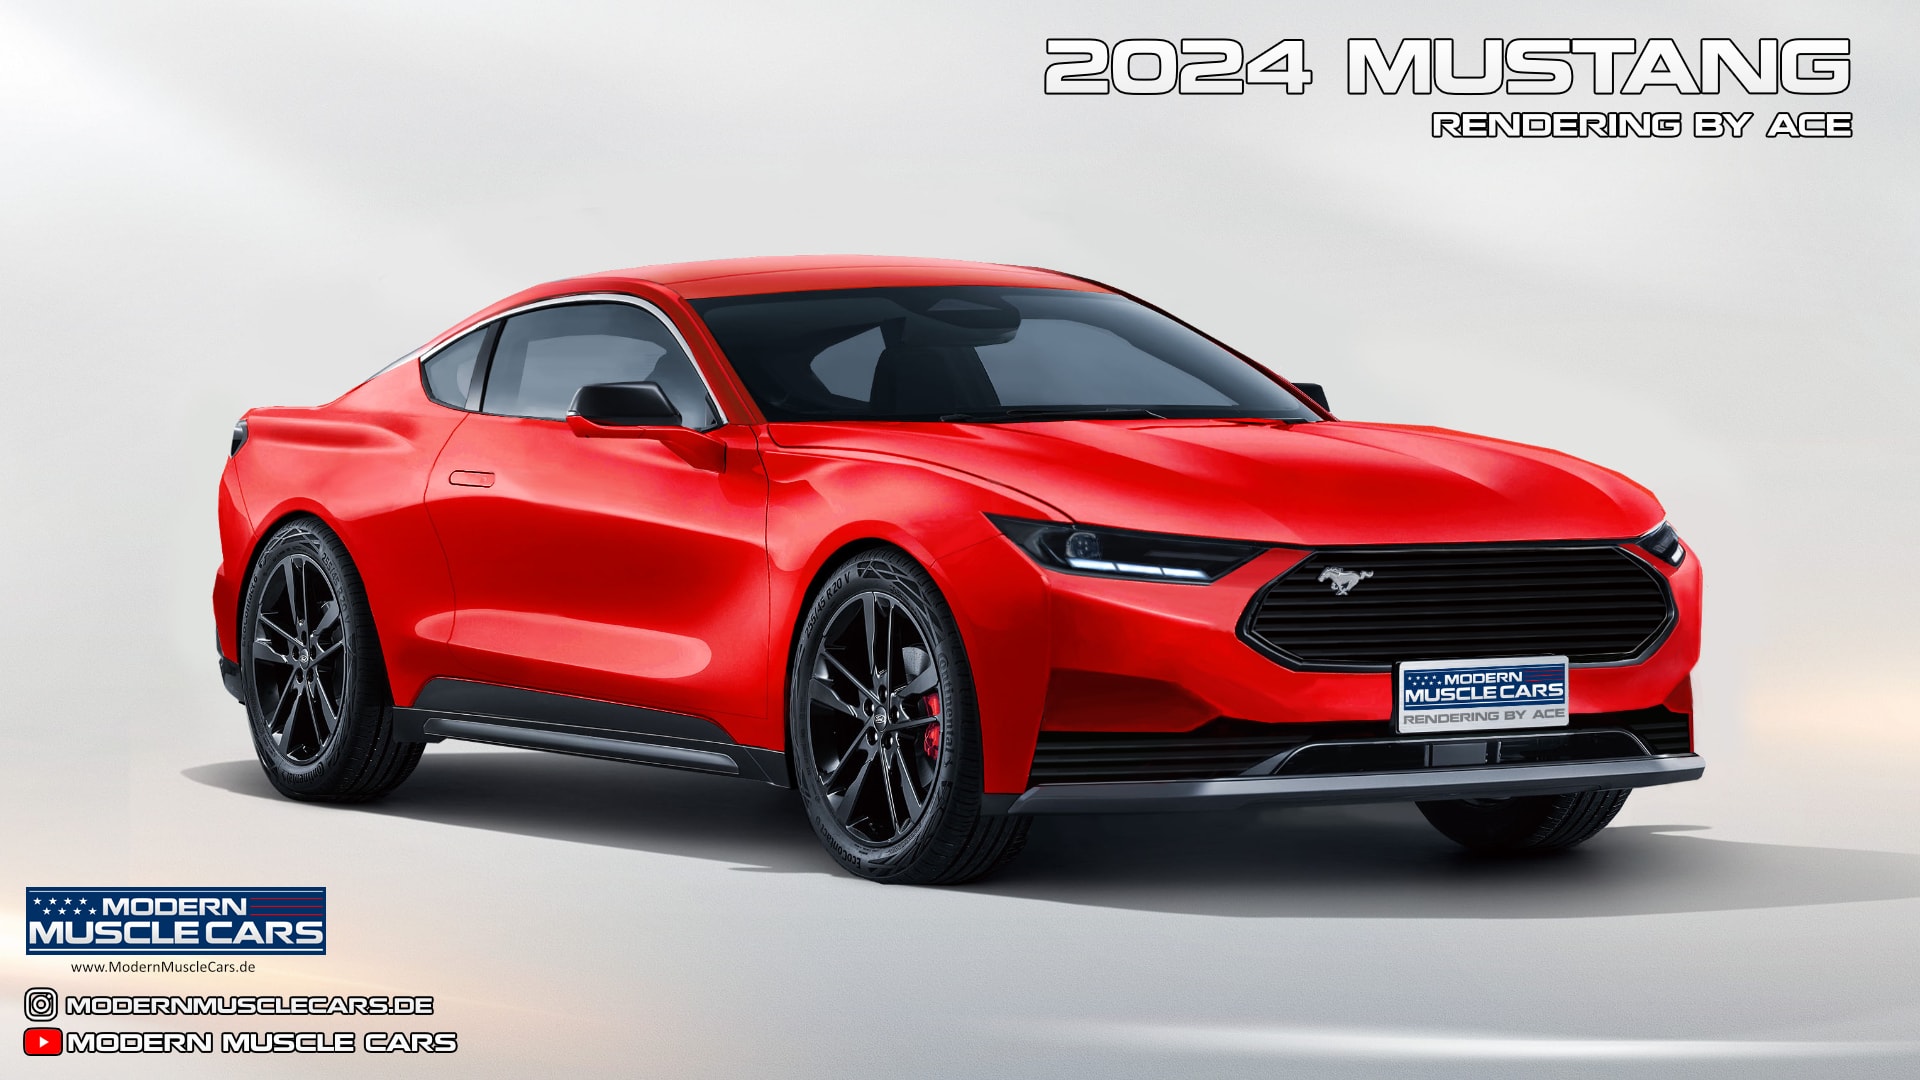 2024 Ford Mustang Rendering Gives Us First Look at the NextGen Muscle